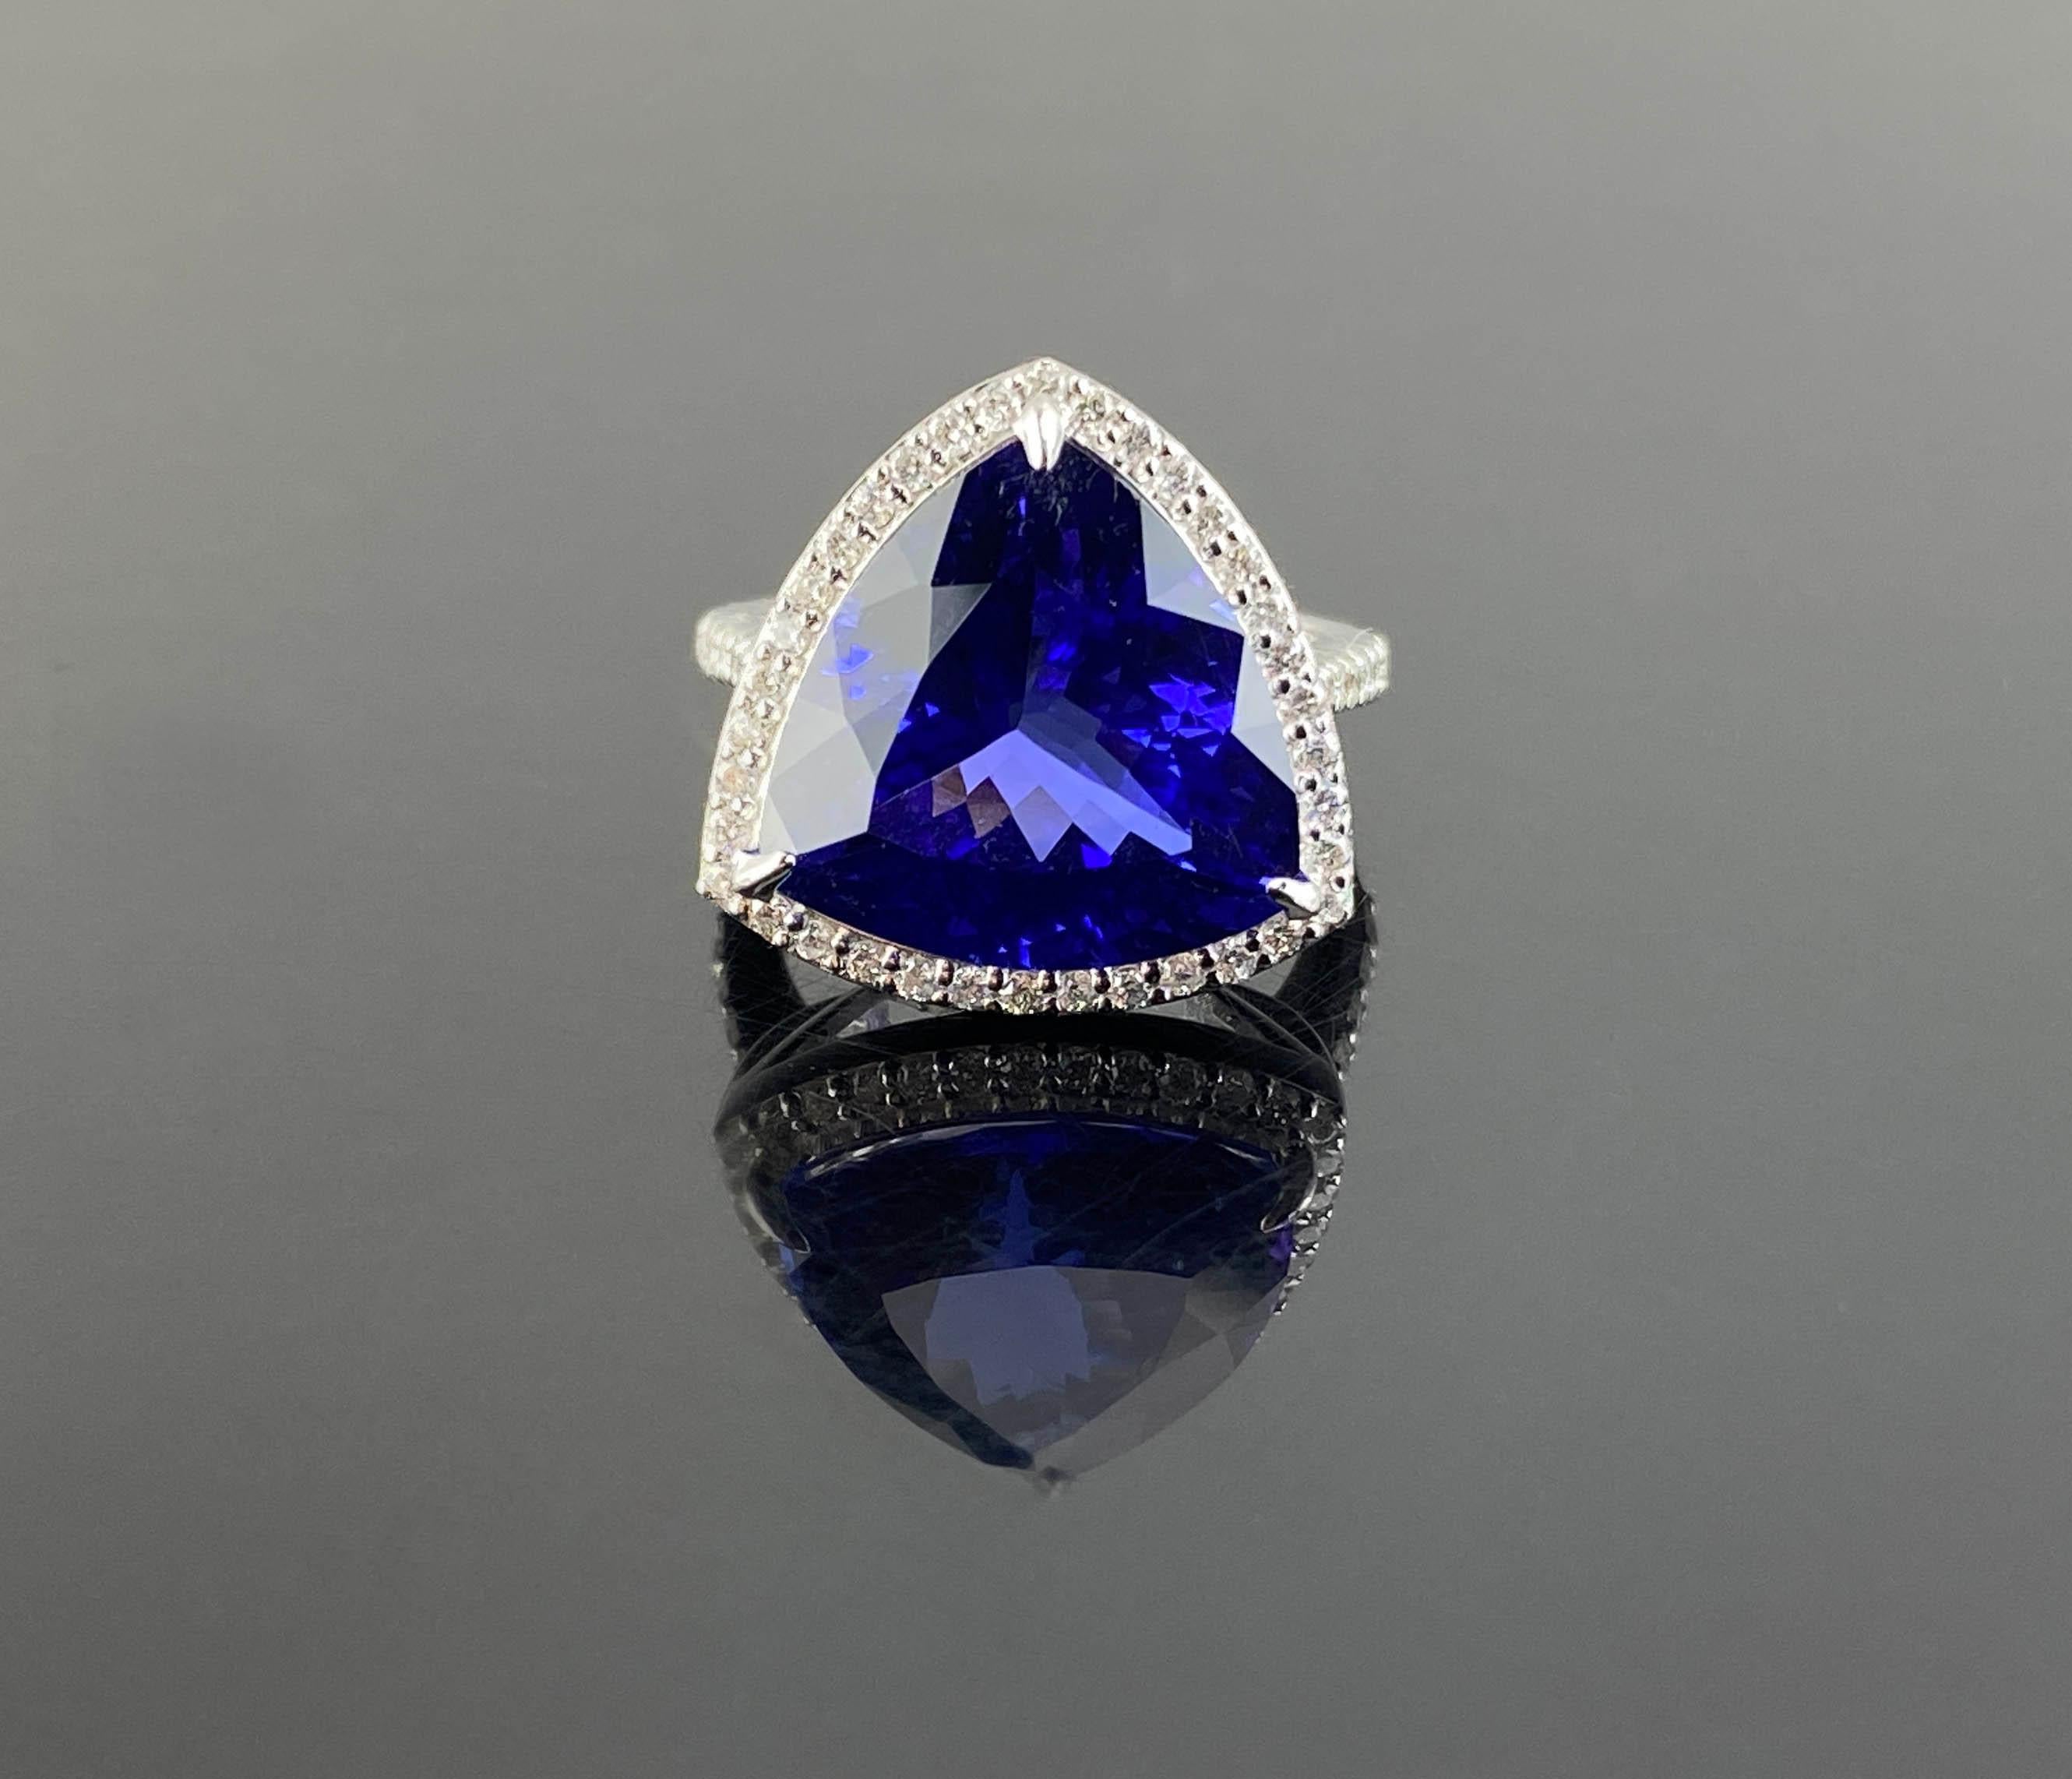 A beautiful Trillion Cut Cocktail Ring featuring a 12.54 Carat Tanzanite and 0.69 Carats of Diamond Accents set in White Gold.
The centre stone Tanzanite is completely transparent, with no inclusions, and the gemstones are all set in 8 grams of 18K